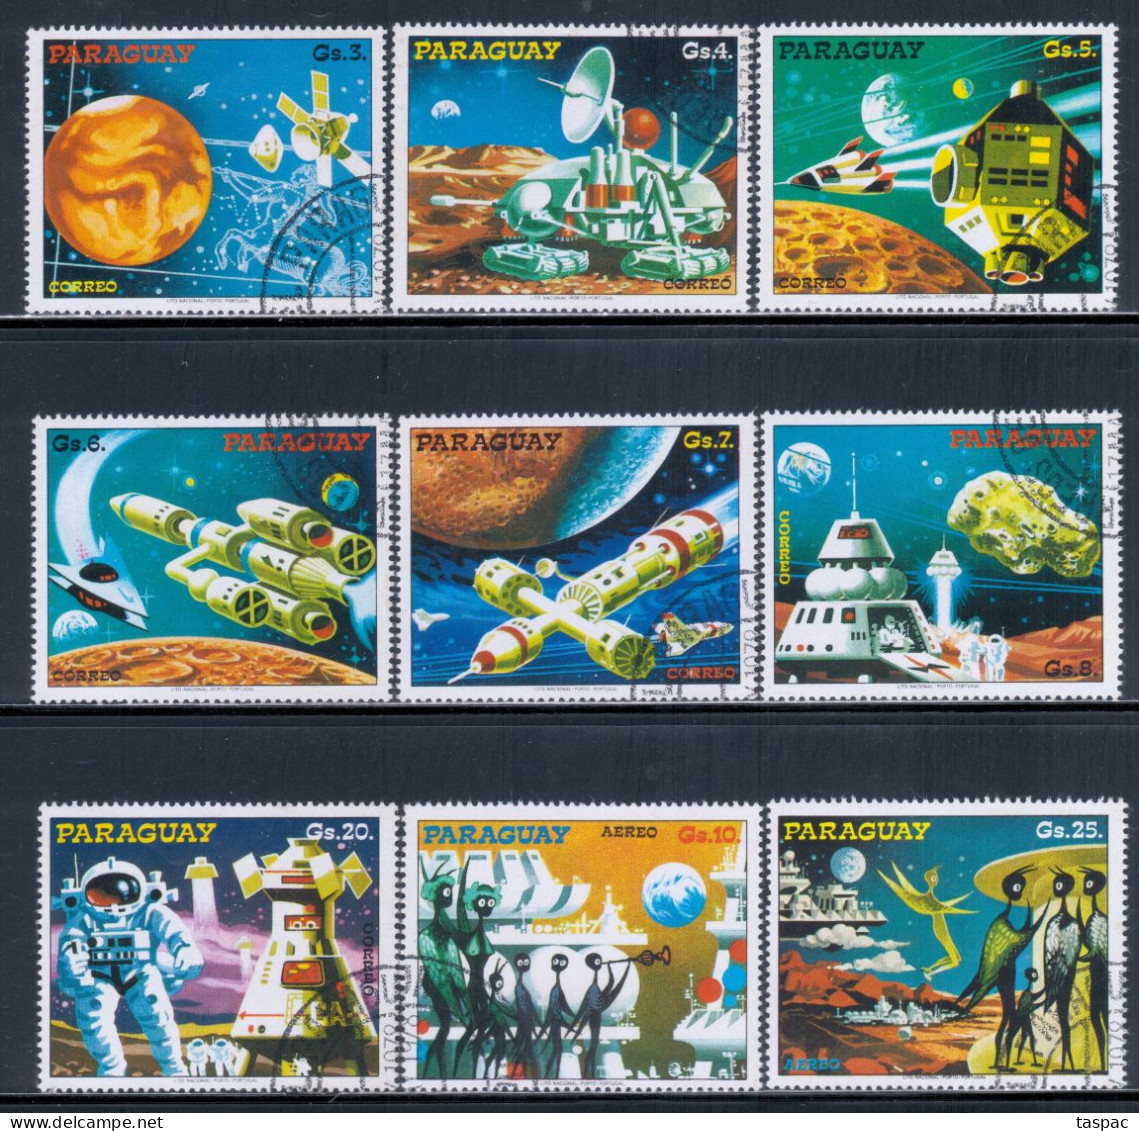 Paraguay 1978 Mi# 3051-3059 Used - Future Space Projects - South America